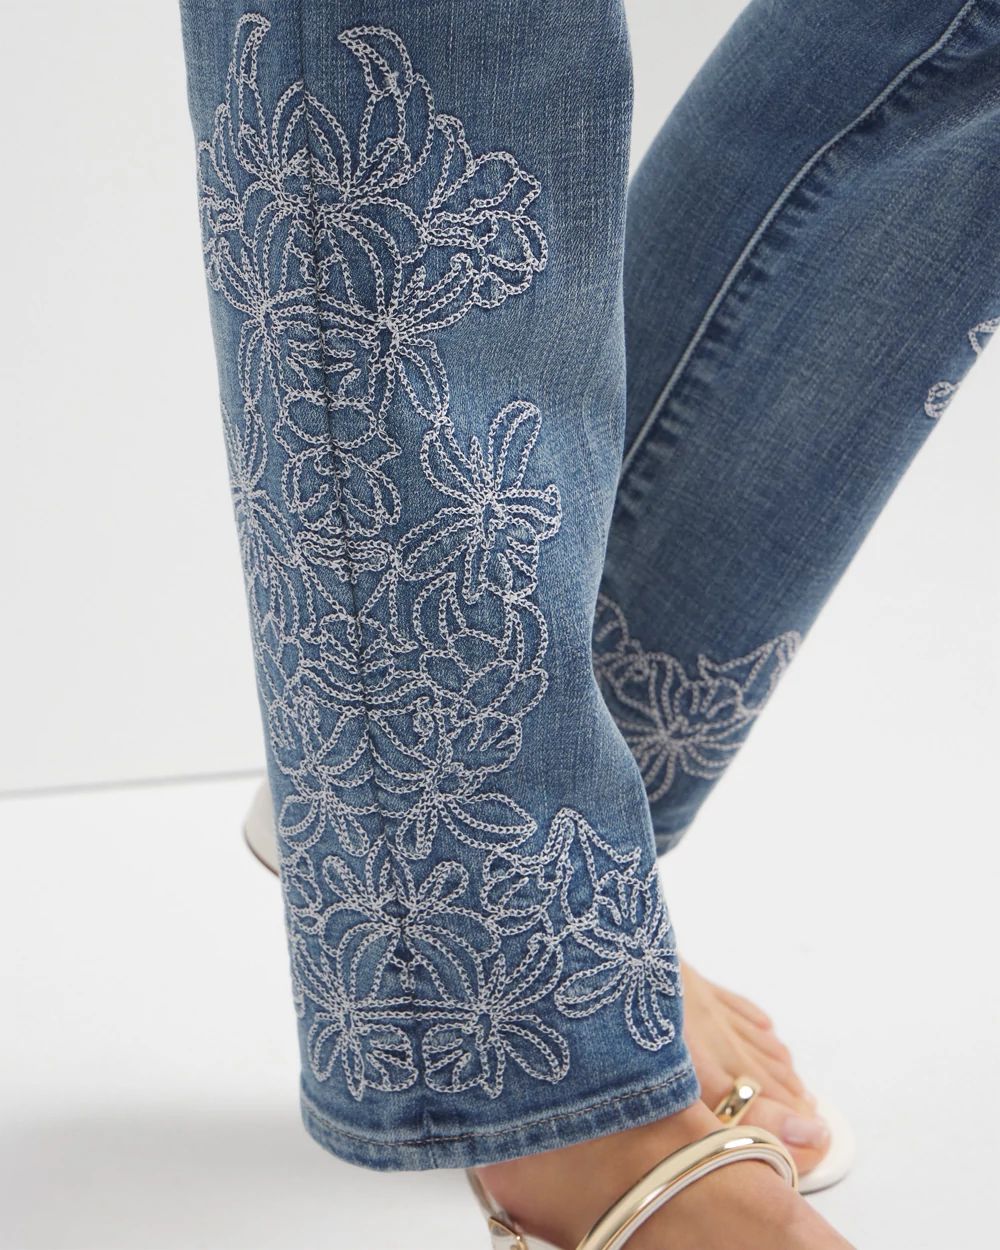 Mid-Rise Everyday Soft Embroidered Girlfriend Jeans